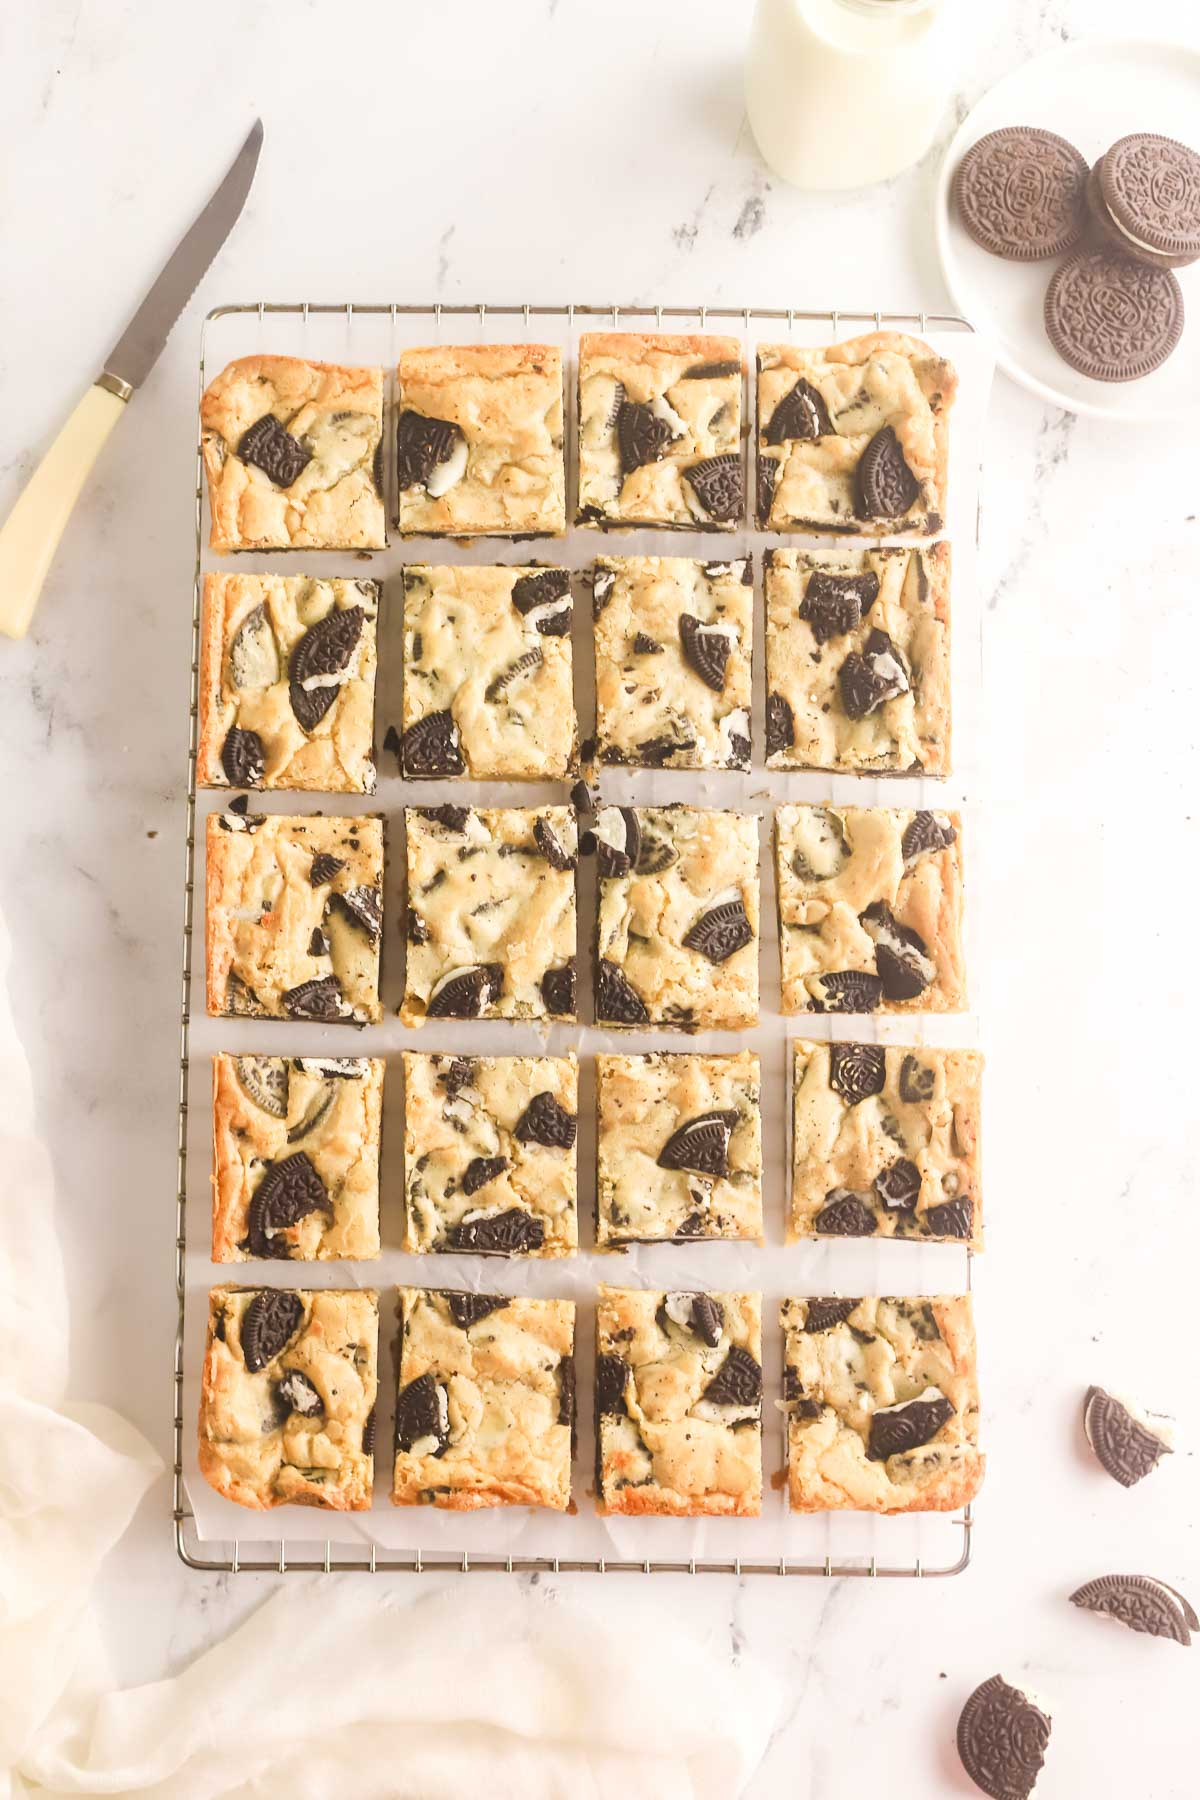 Oreo blondies cut into squares on a wire rack